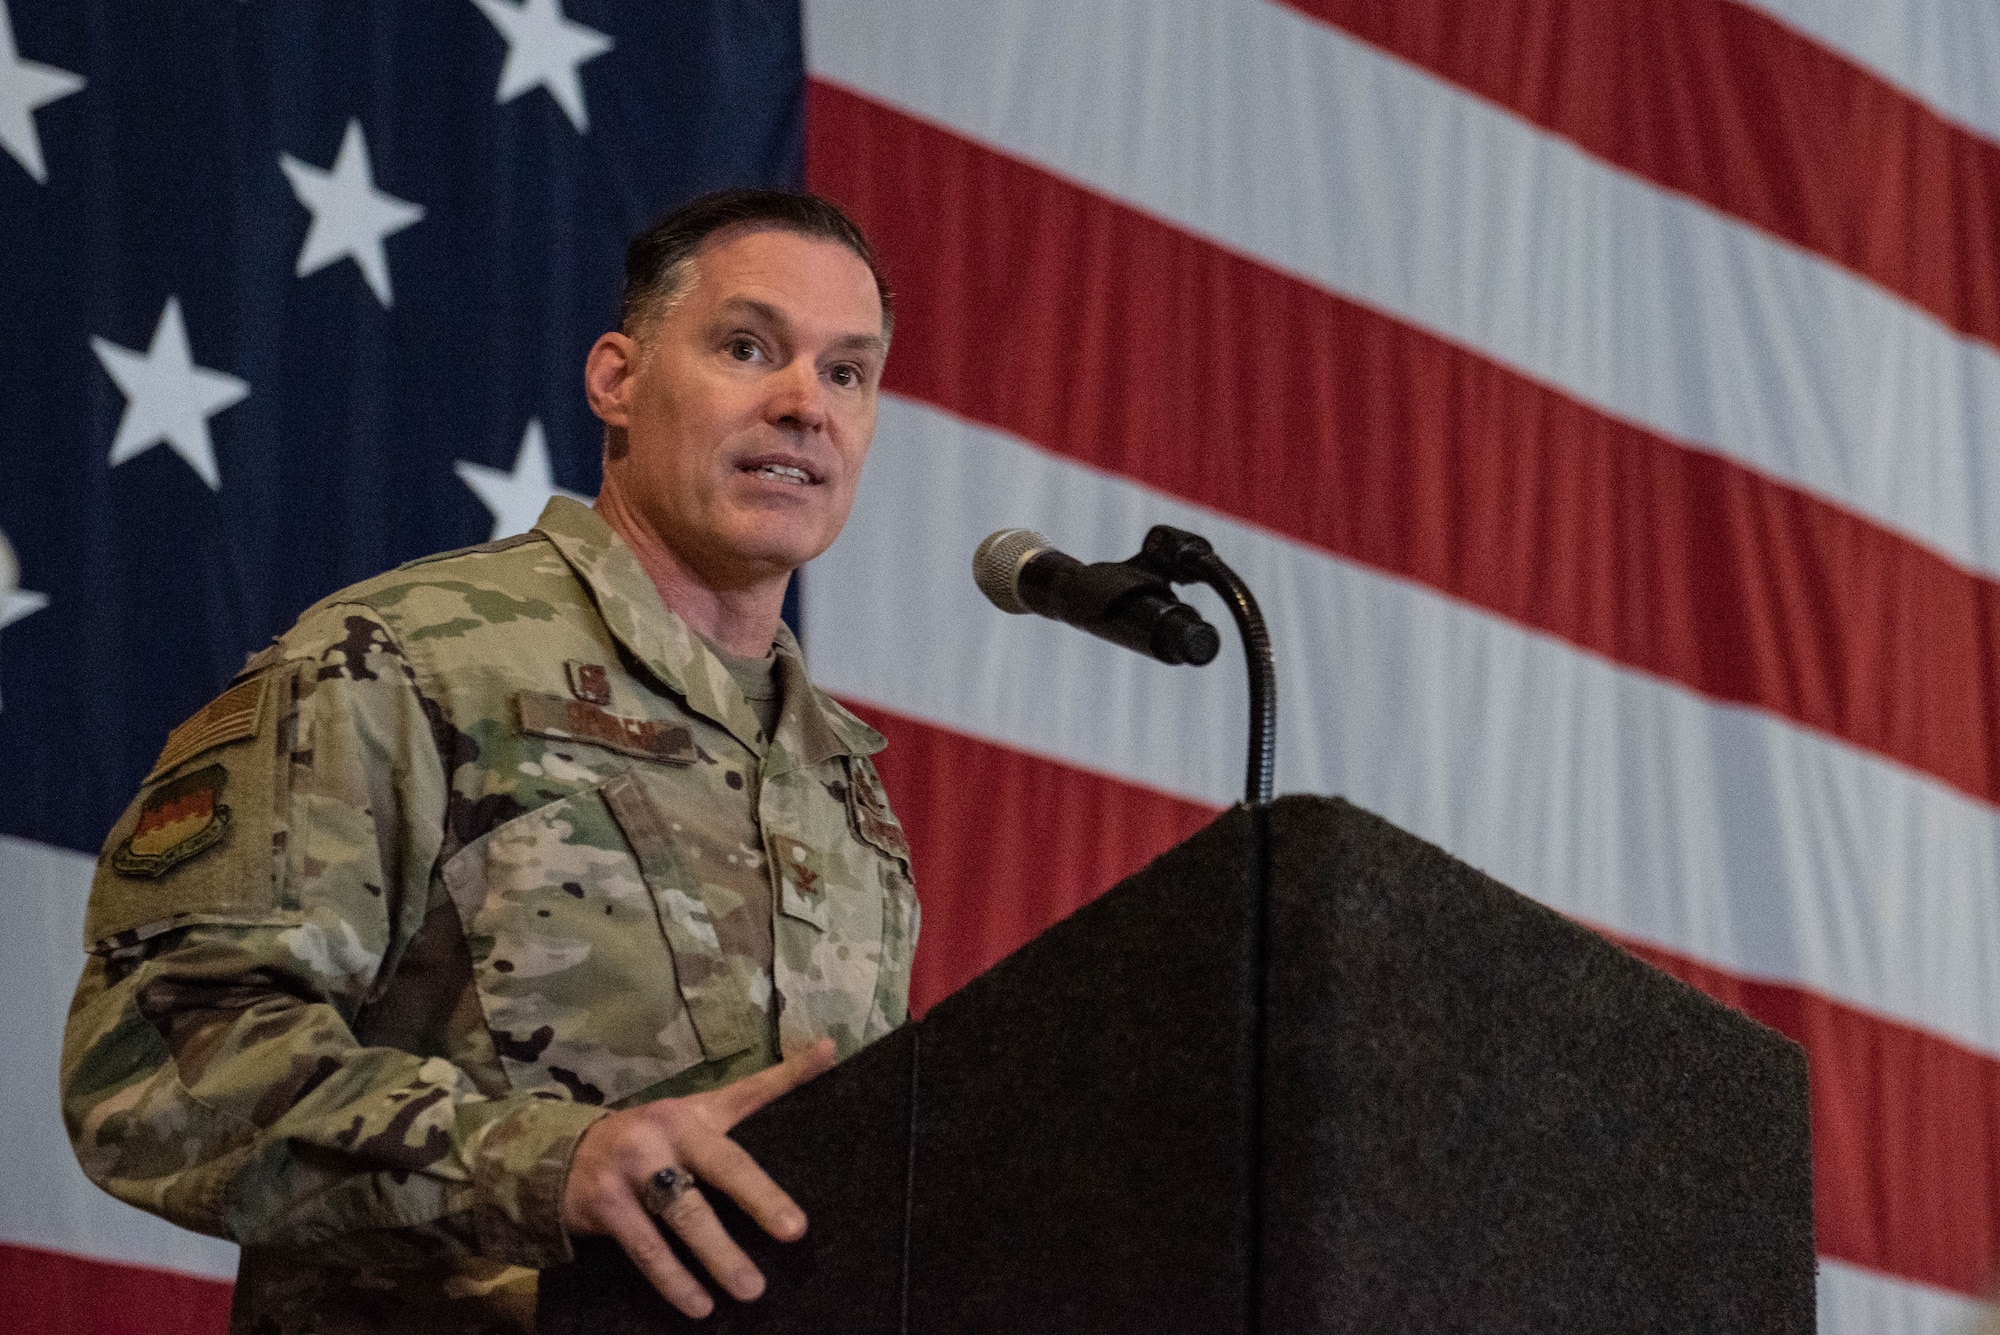 U.S. Air Force Col. George Sebren, 20th Maintenance Group commander, provides remarks during a squadron stand-up ceremony at Shaw Air Force Base, South Carolina, Feb. 24, 2020.